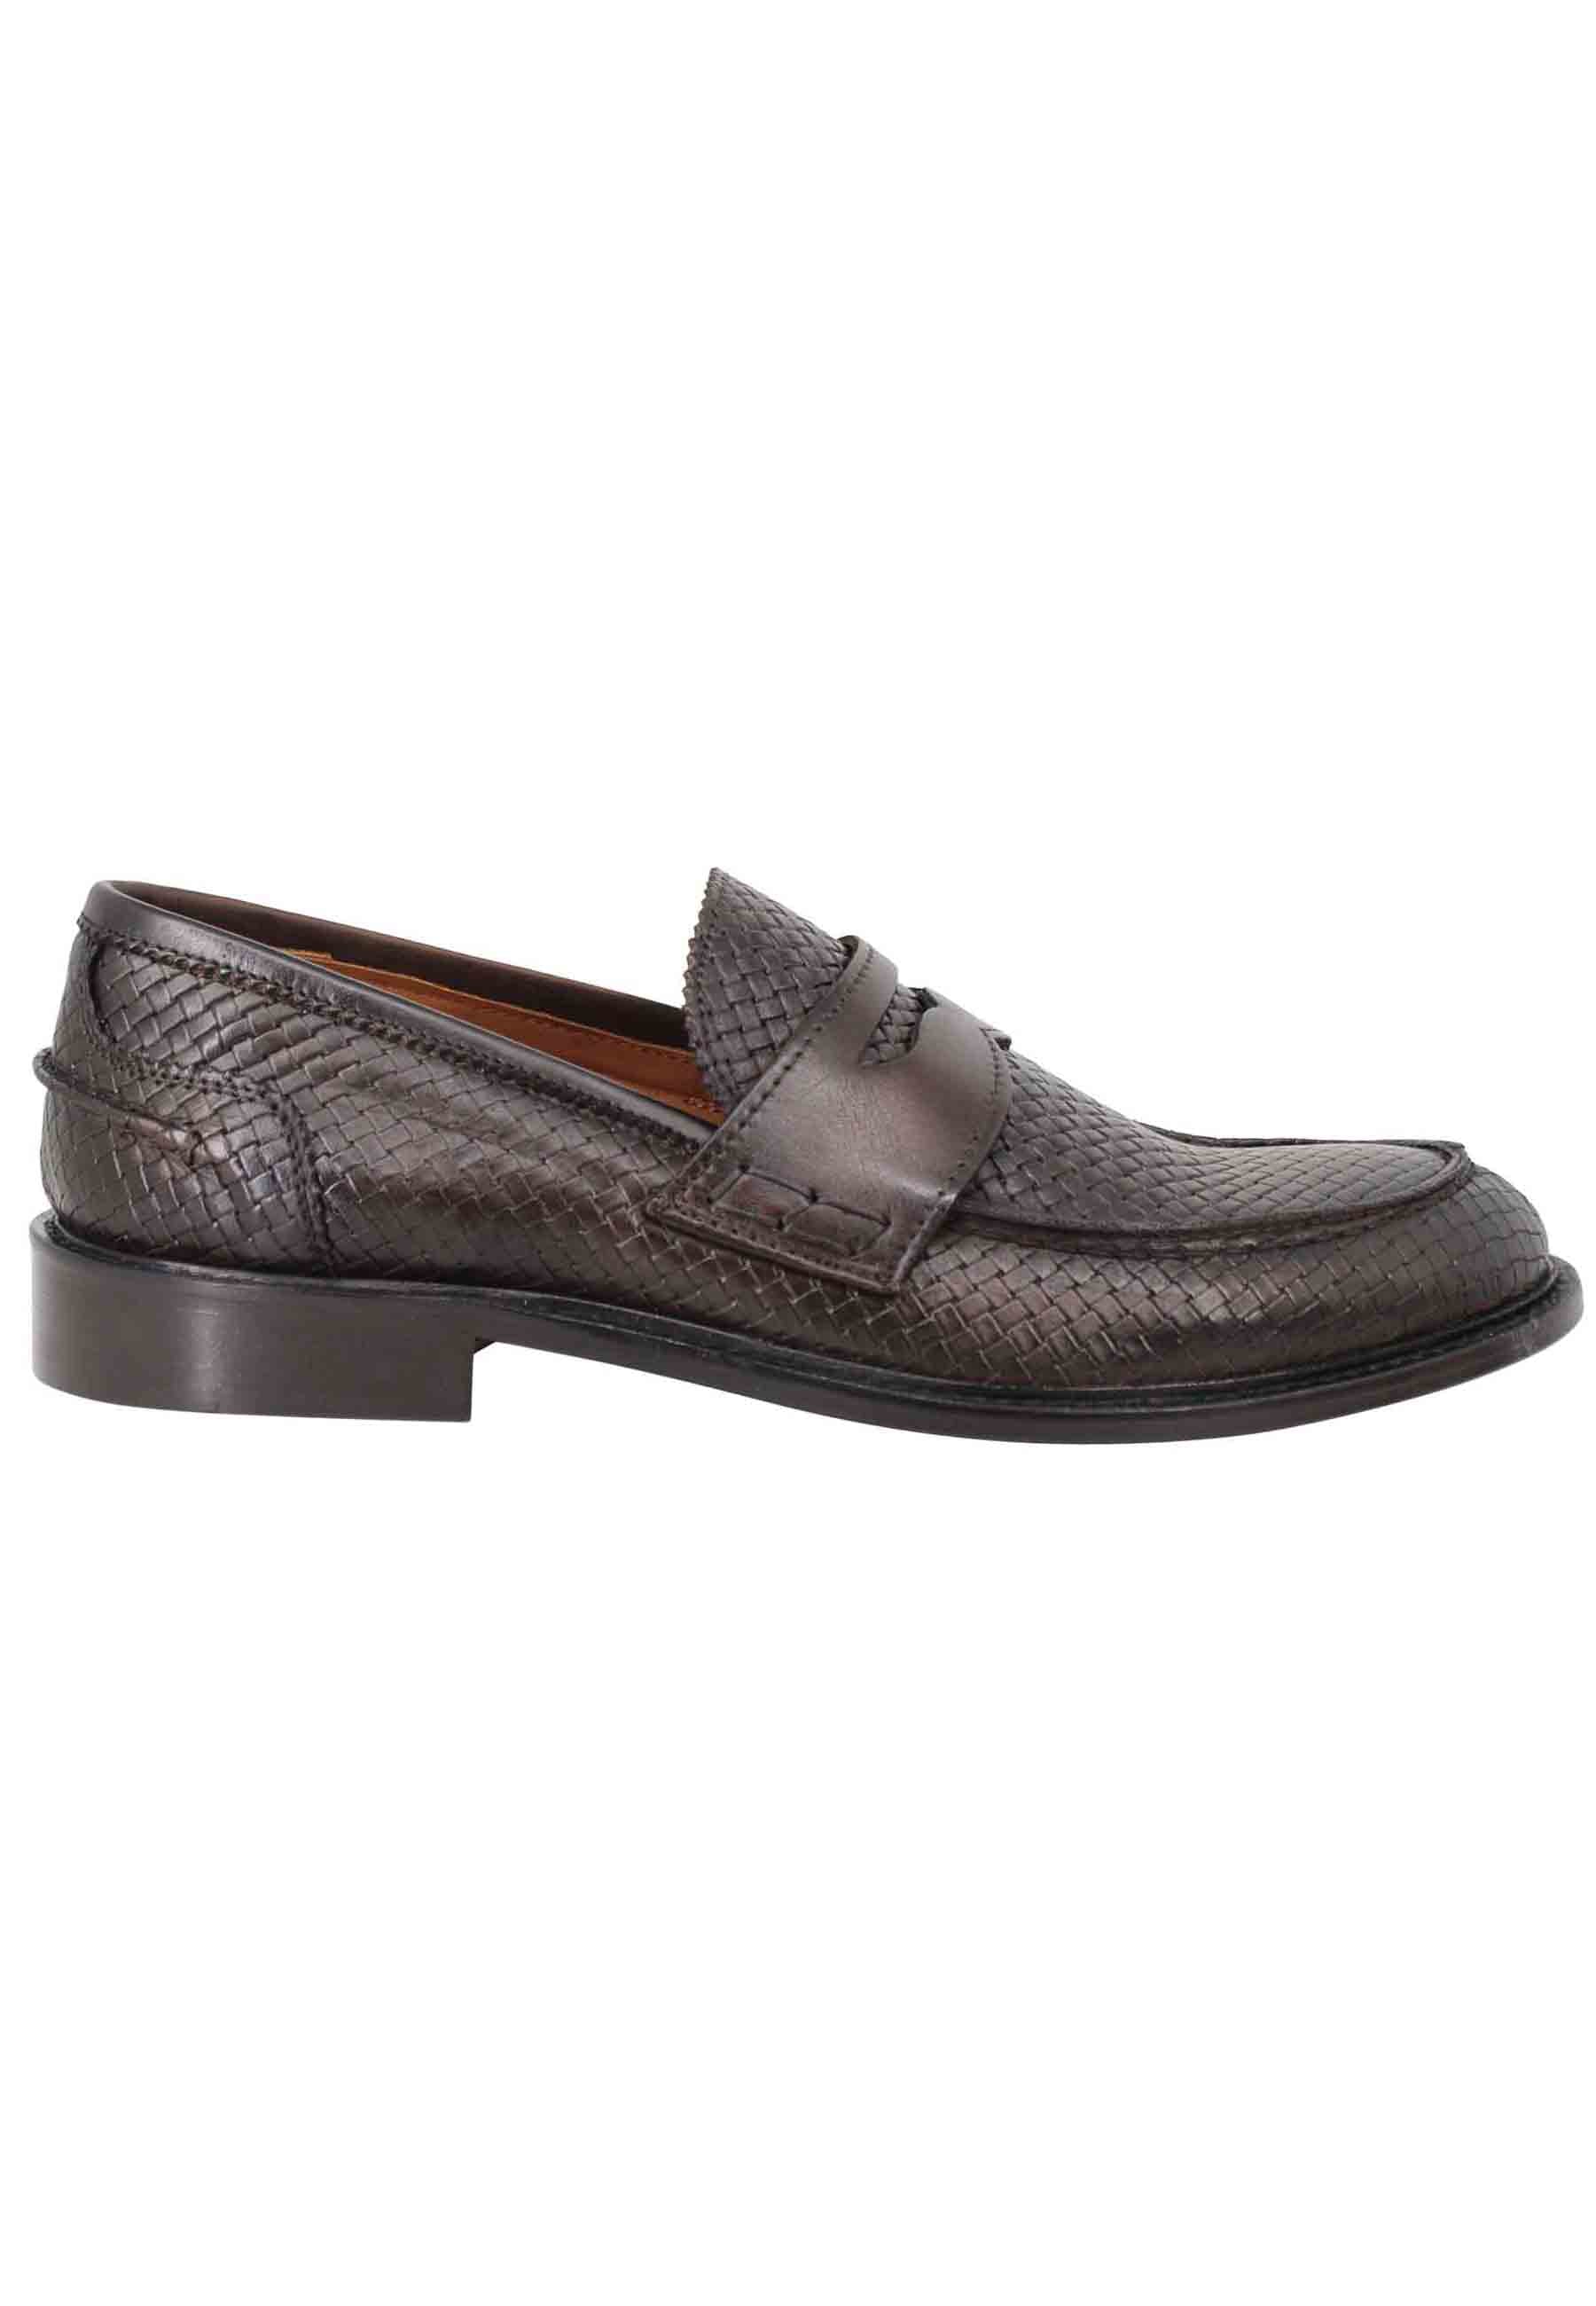 Men's moccasins in dark brown woven leather with stitched leather sole